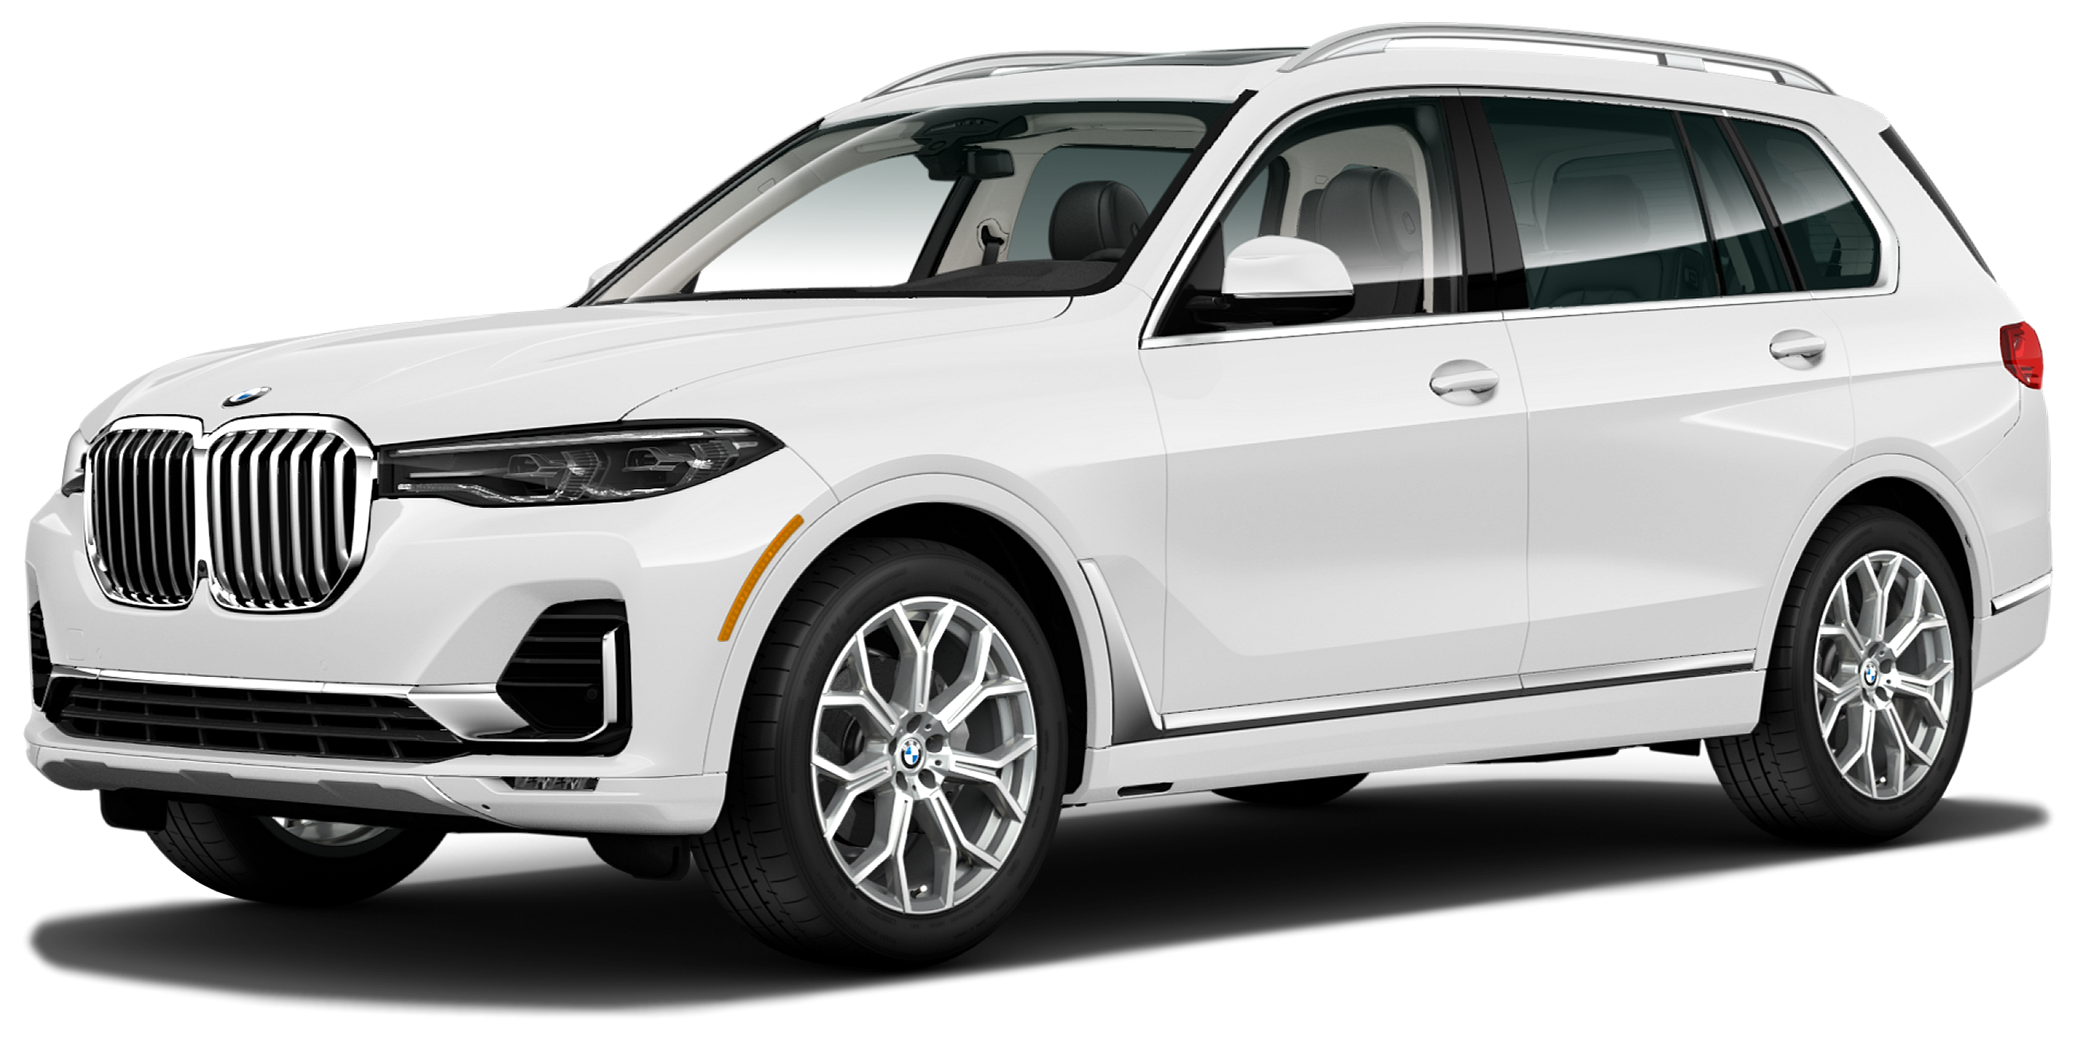 2021 BMW X7 Incentives, Specials & Offers in Roanoke VA